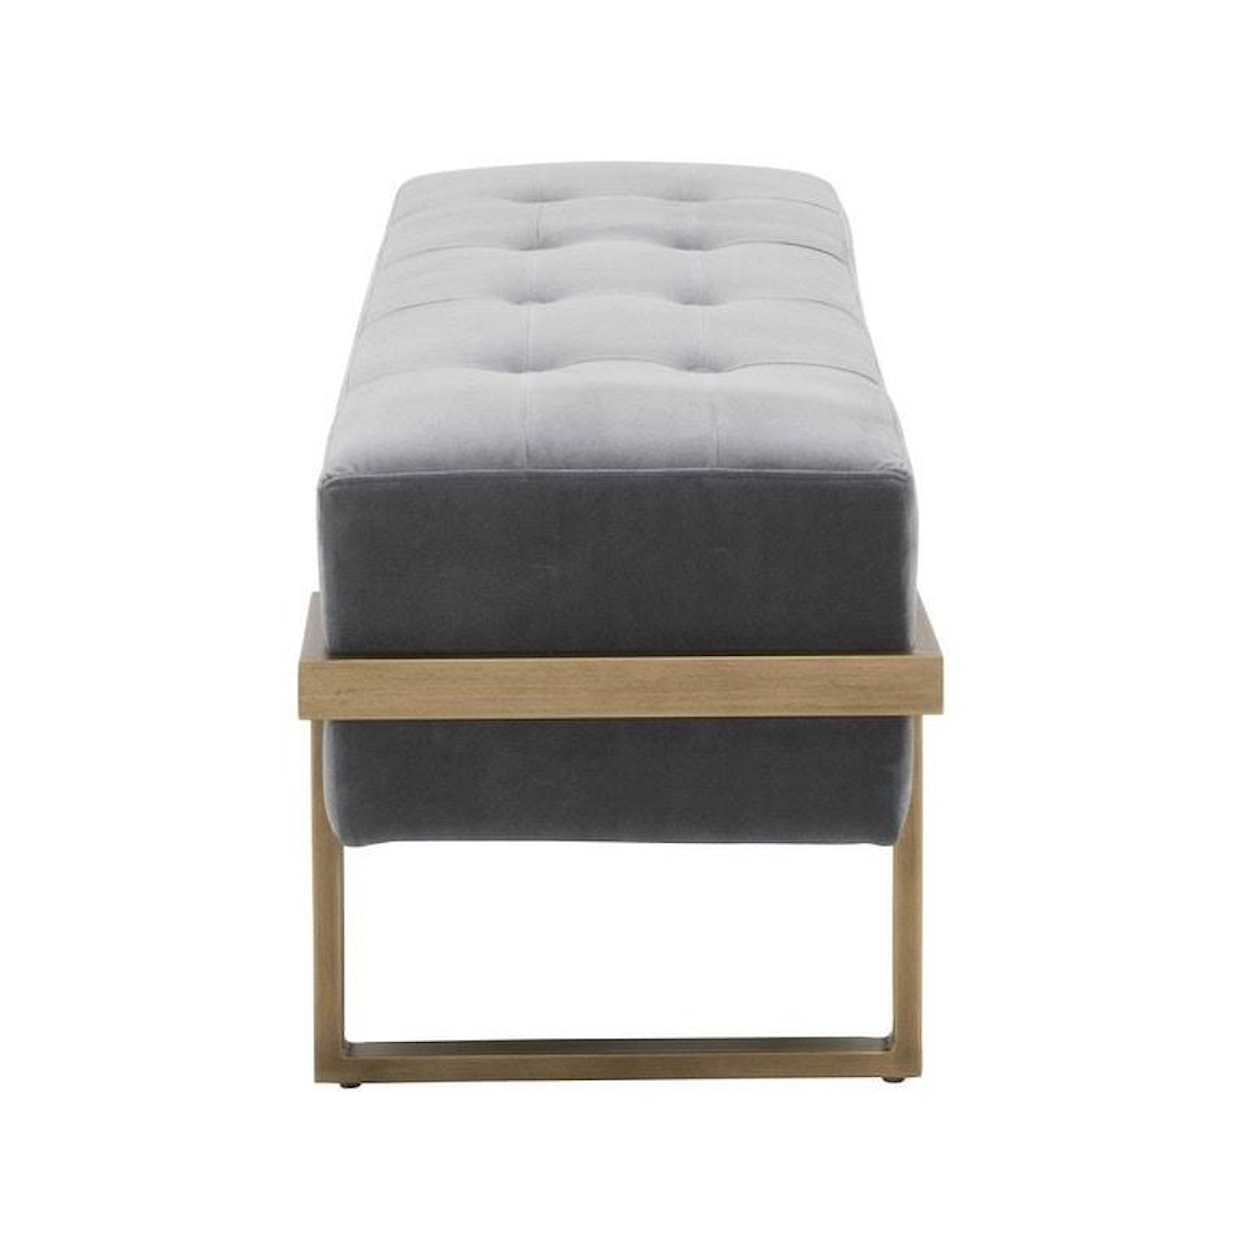 Essentials for Living Fiona Fiona Upholstered Bench